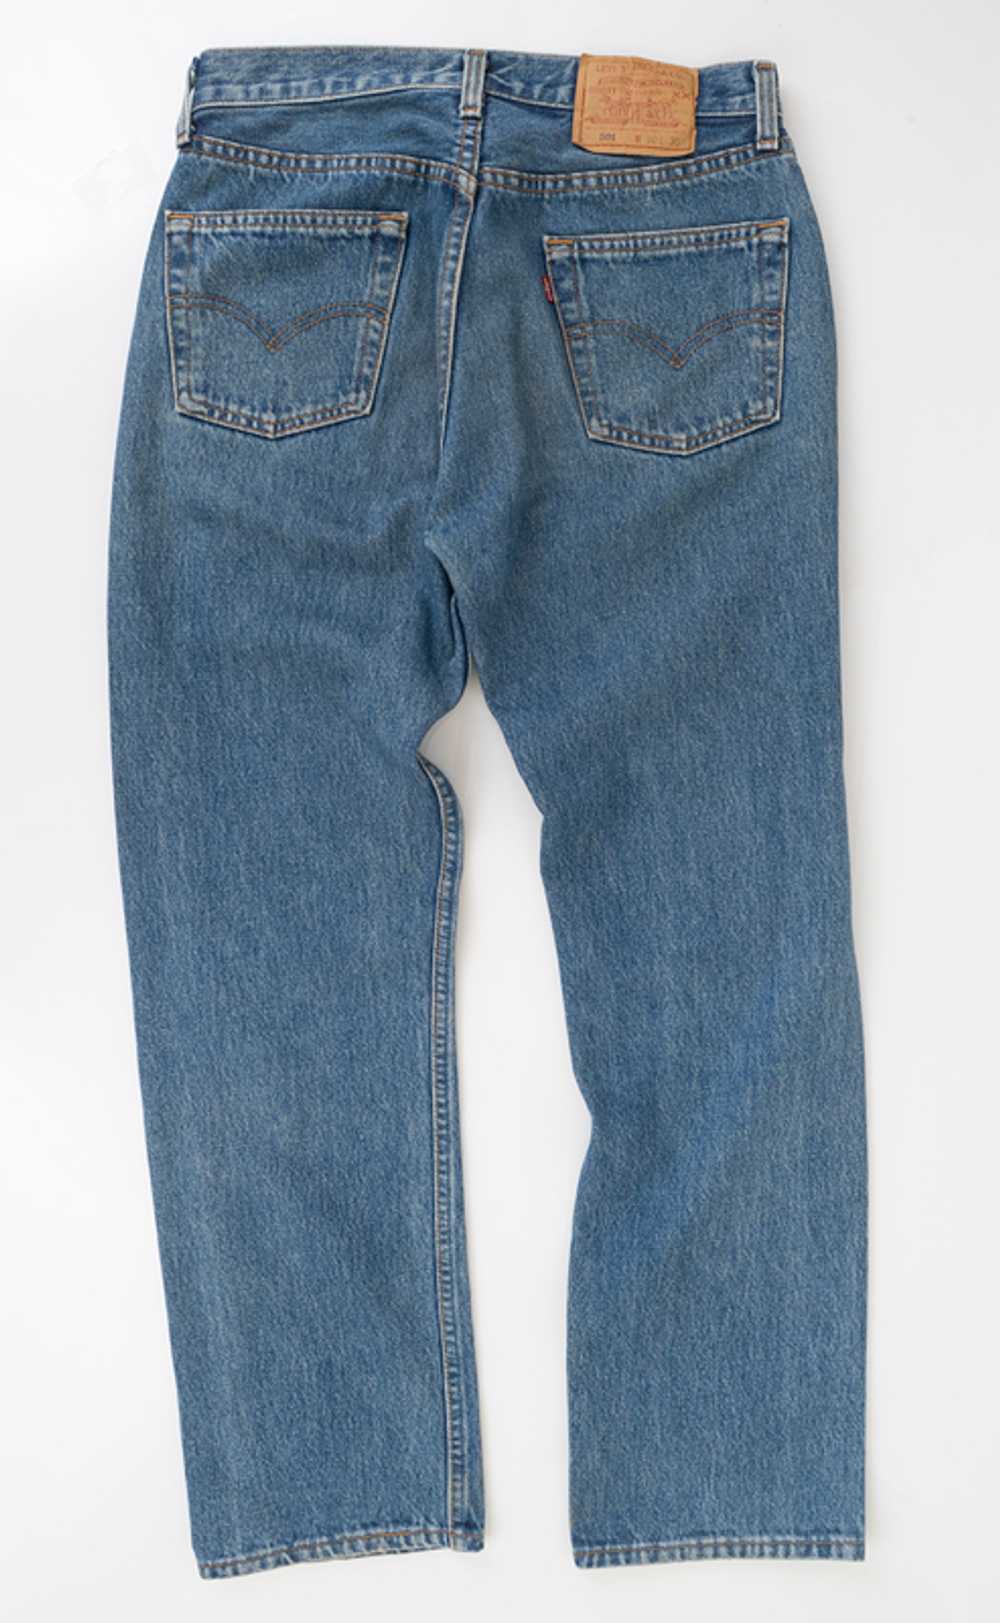 1990s Levi's 501 Button Fly Jeans - image 2